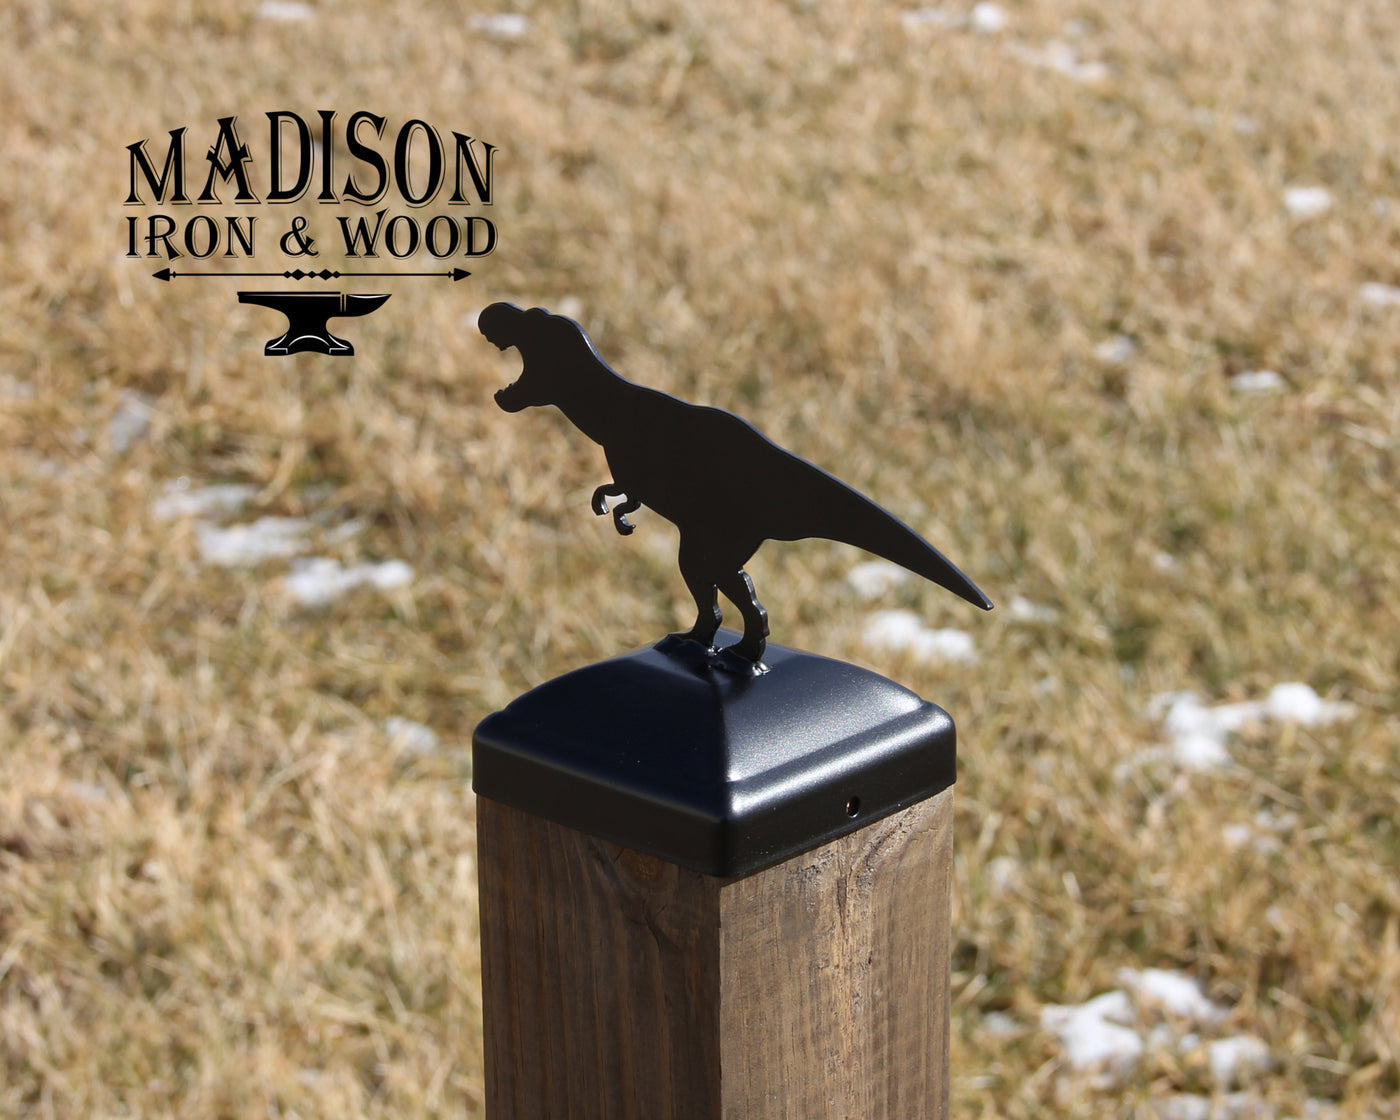 4x4 T-Rex Post Cap - Madison Iron and Wood - Post Cap - metal outdoor decor - Steel deocrations - american made products - veteran owned business products - fencing decorations - fencing supplies - custom wall decorations - personalized wall signs - steel - decorative post caps - steel post caps - metal post caps - brackets - structural brackets - home improvement - easter - easter decorations - easter gift - easter yard decor